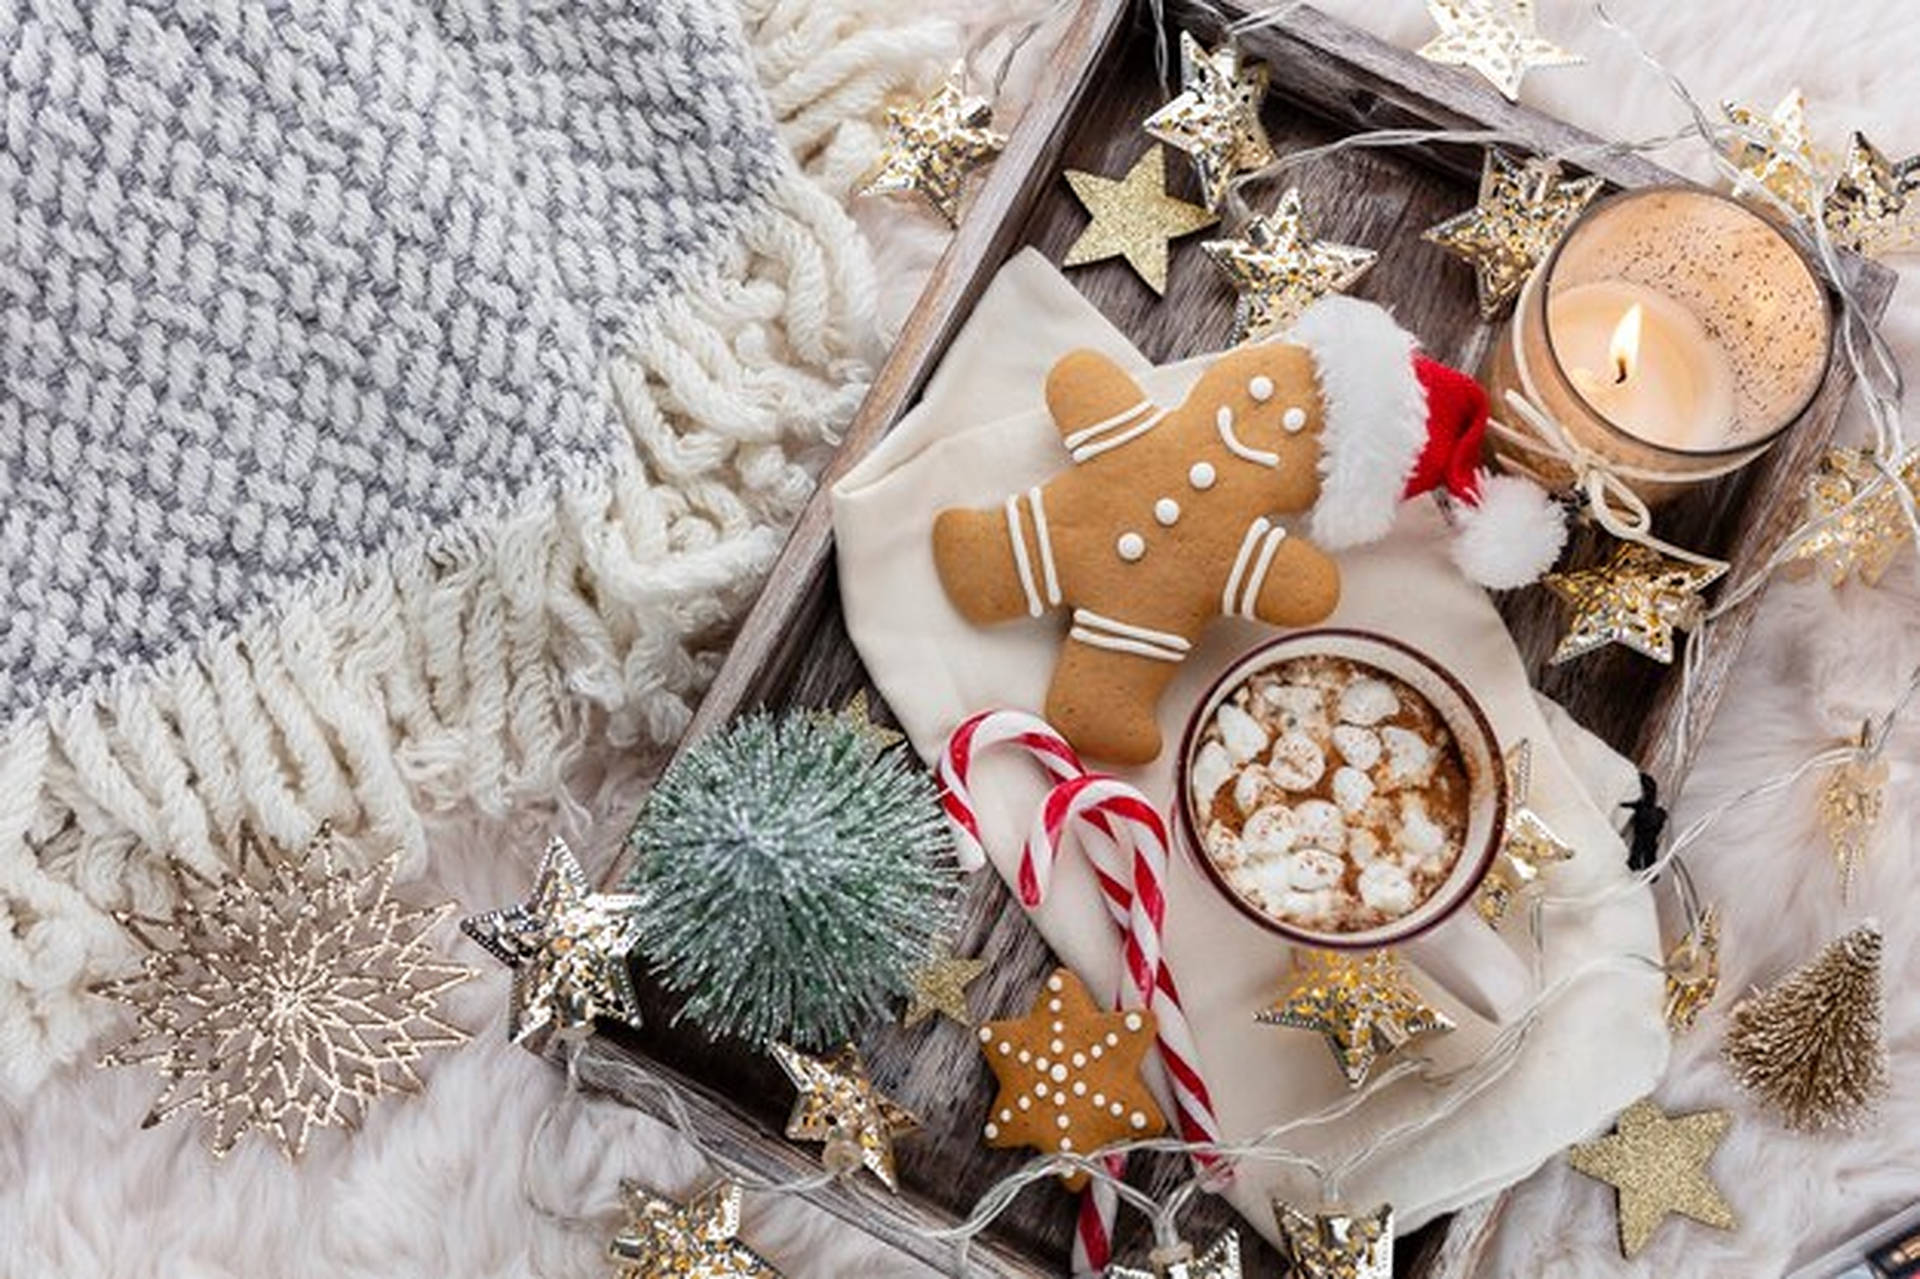 A tray with a hot chocolate, a gingerbread man and a candle. - Cozy, Christmas